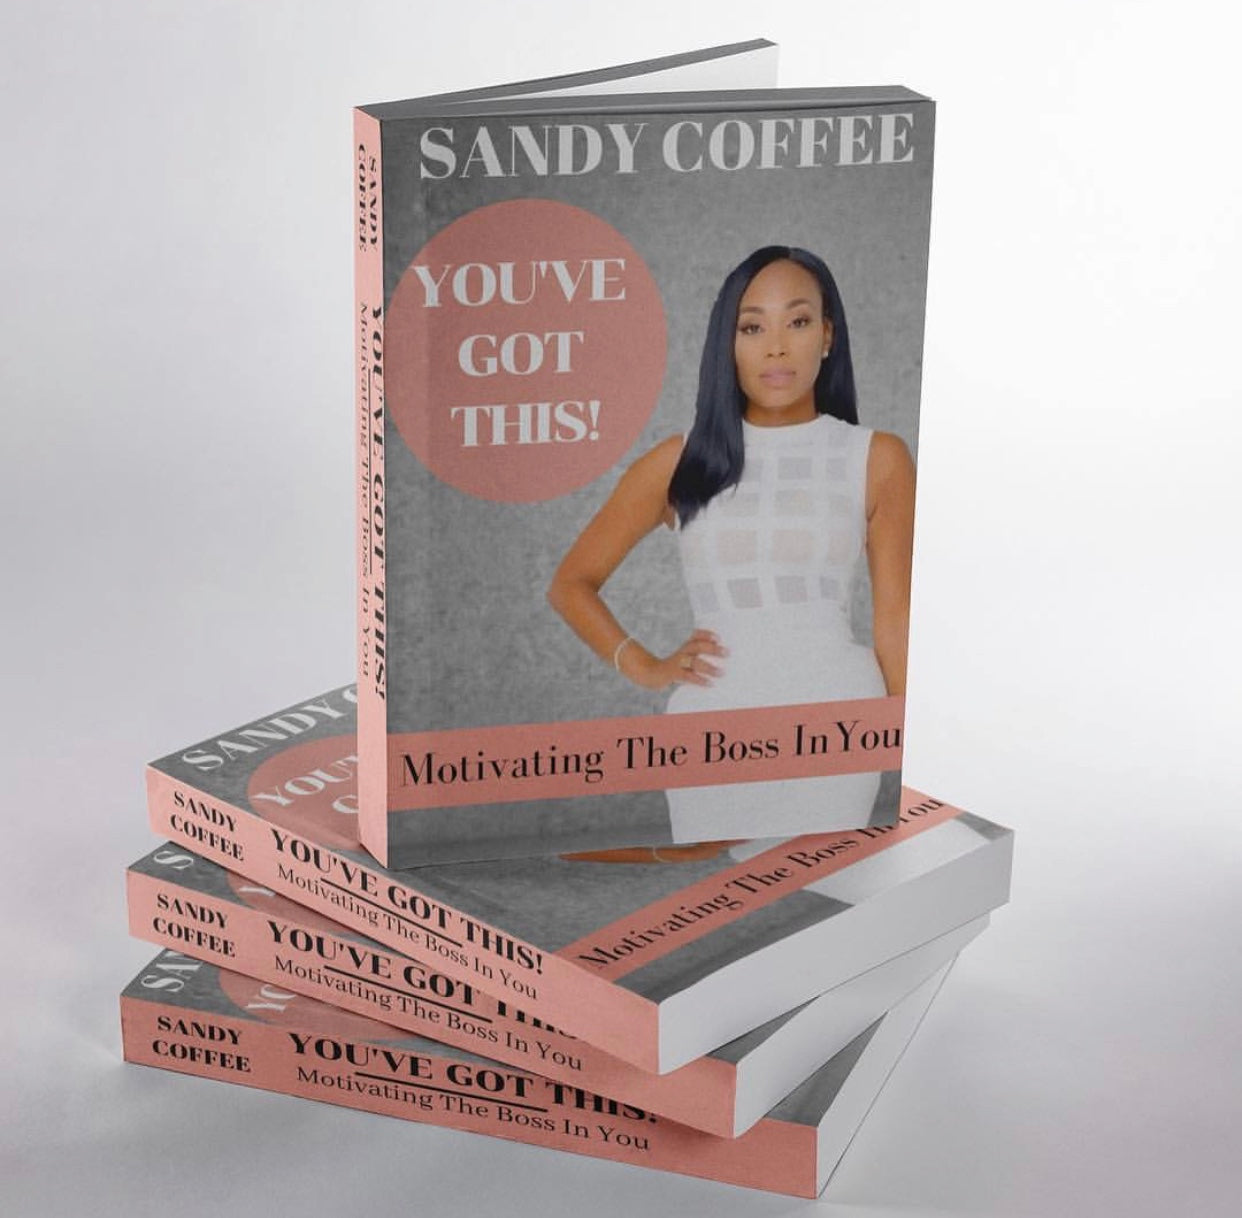 "YOU'VE GOT THIS!" by Sandy Coffee (Ebook)